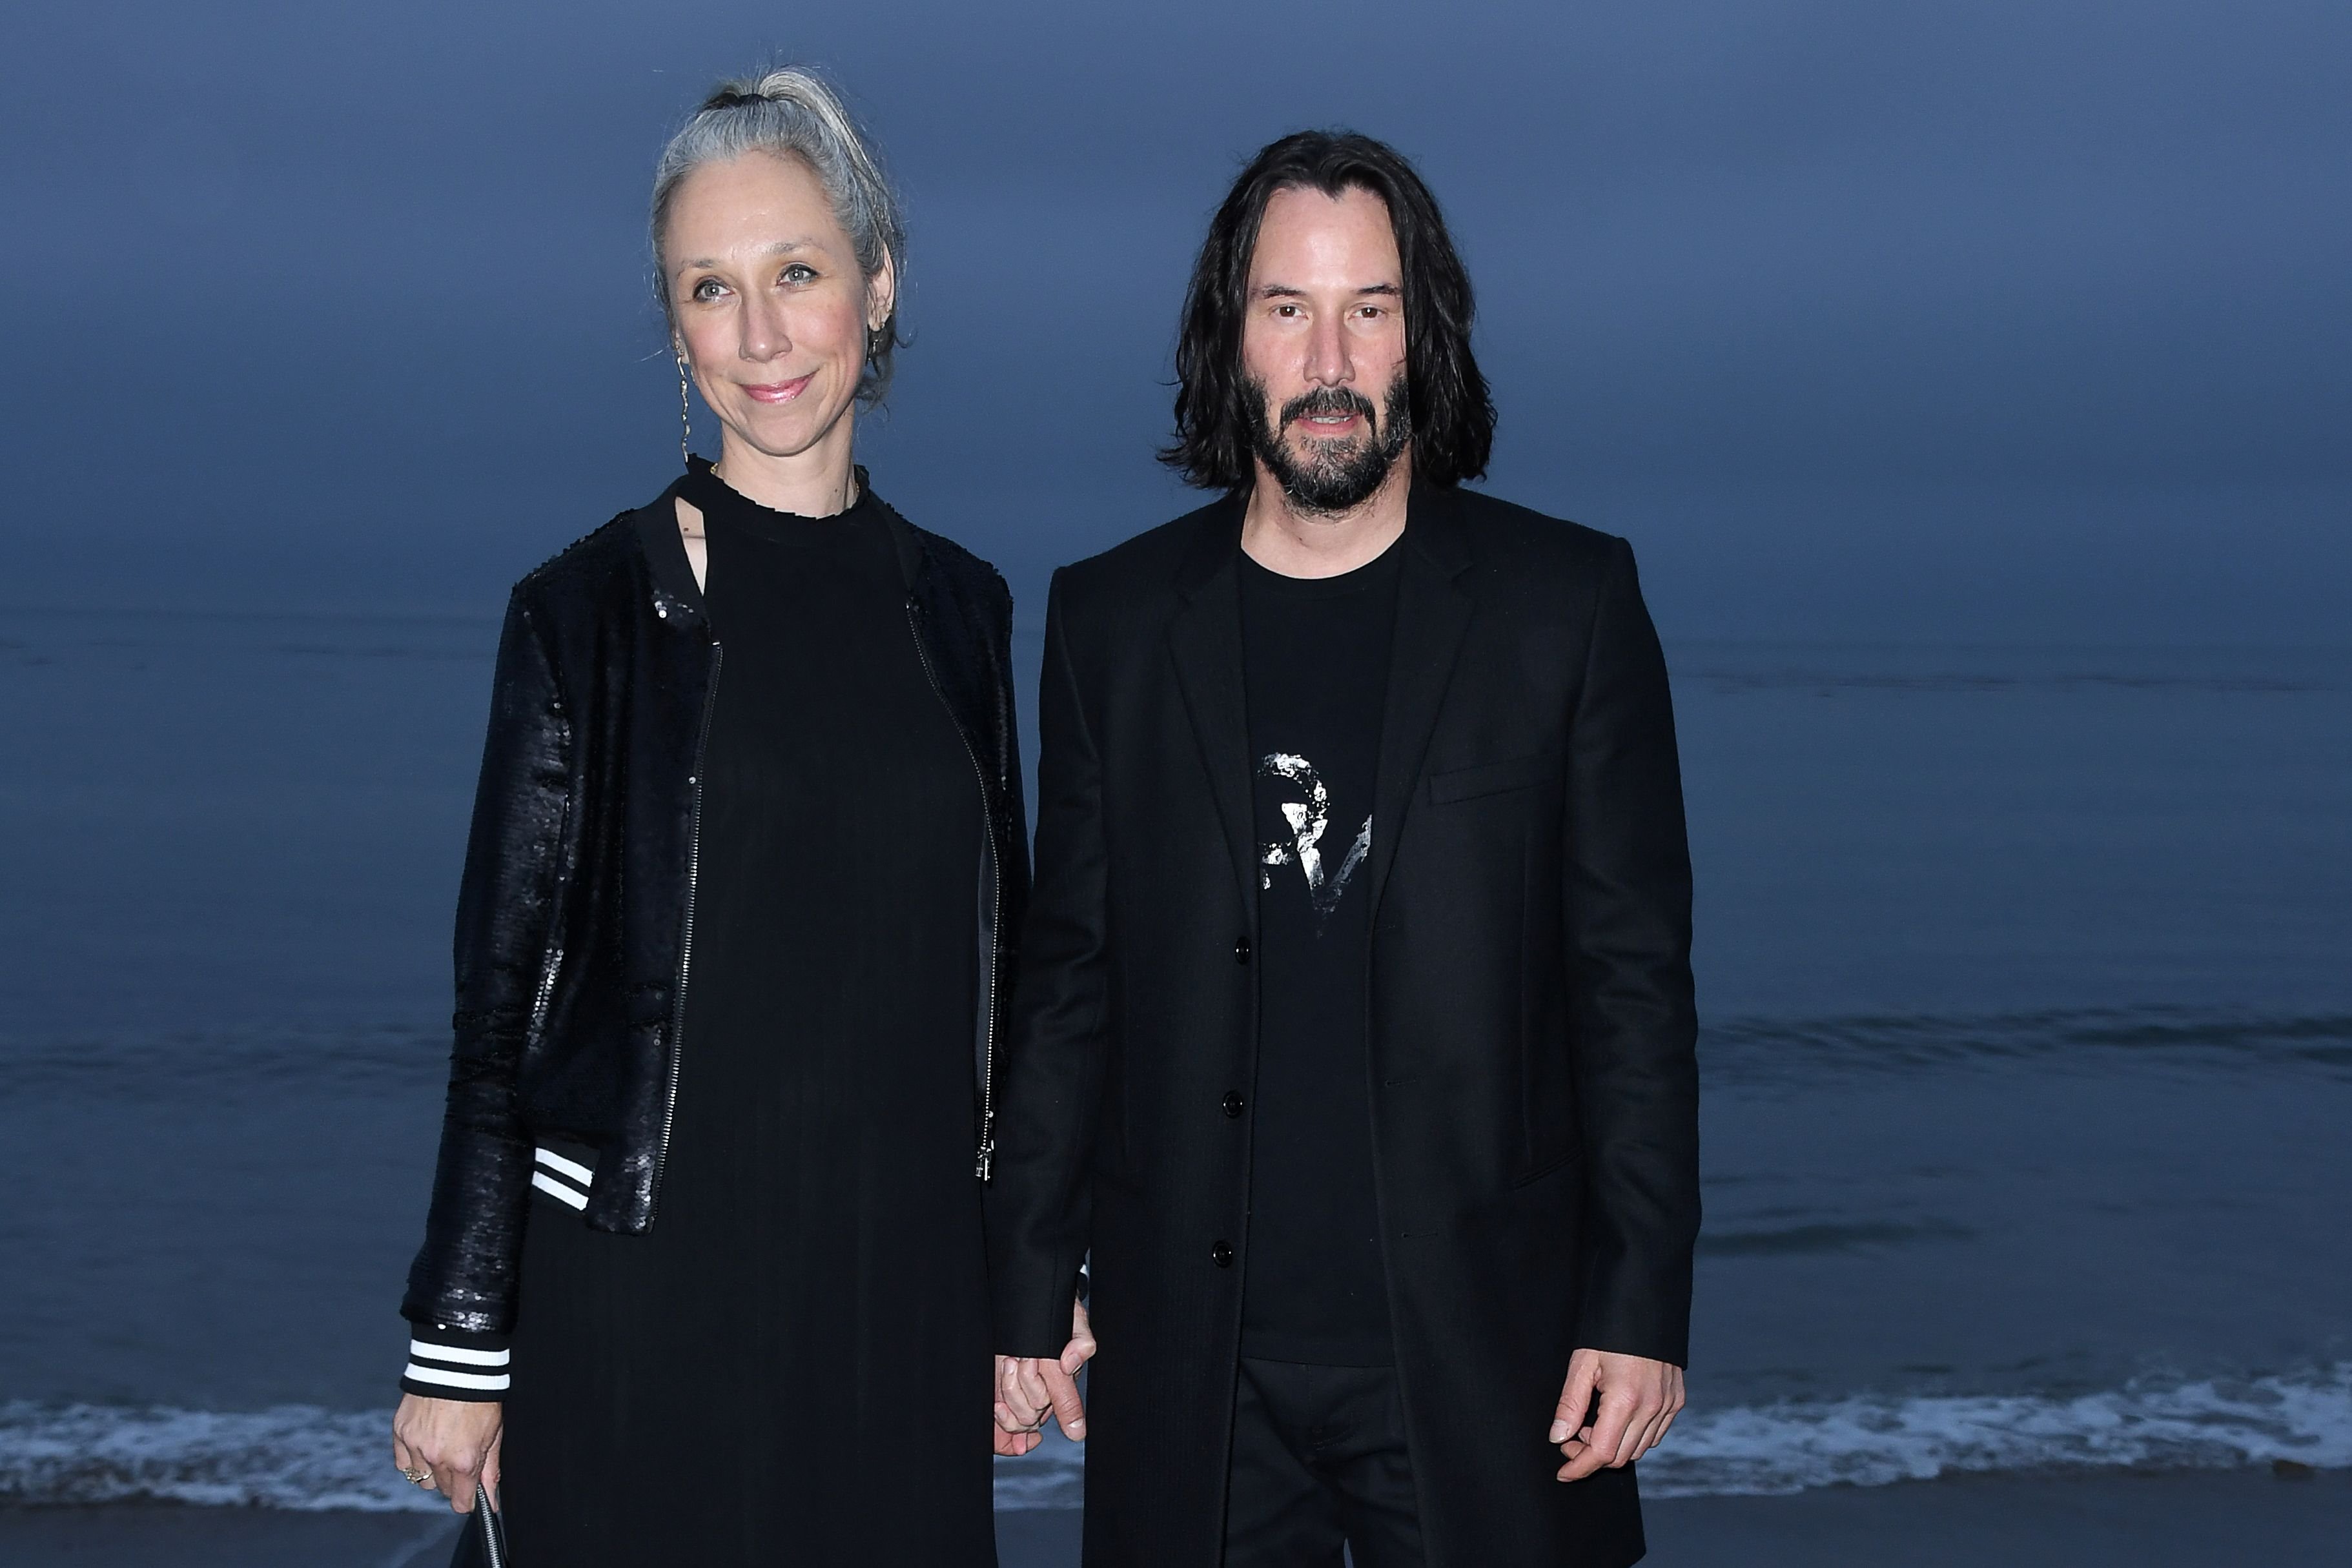 Keanu Reeves and Alexandra Grant on June 6, 2019 in Malibu, California. | Source: Getty Images